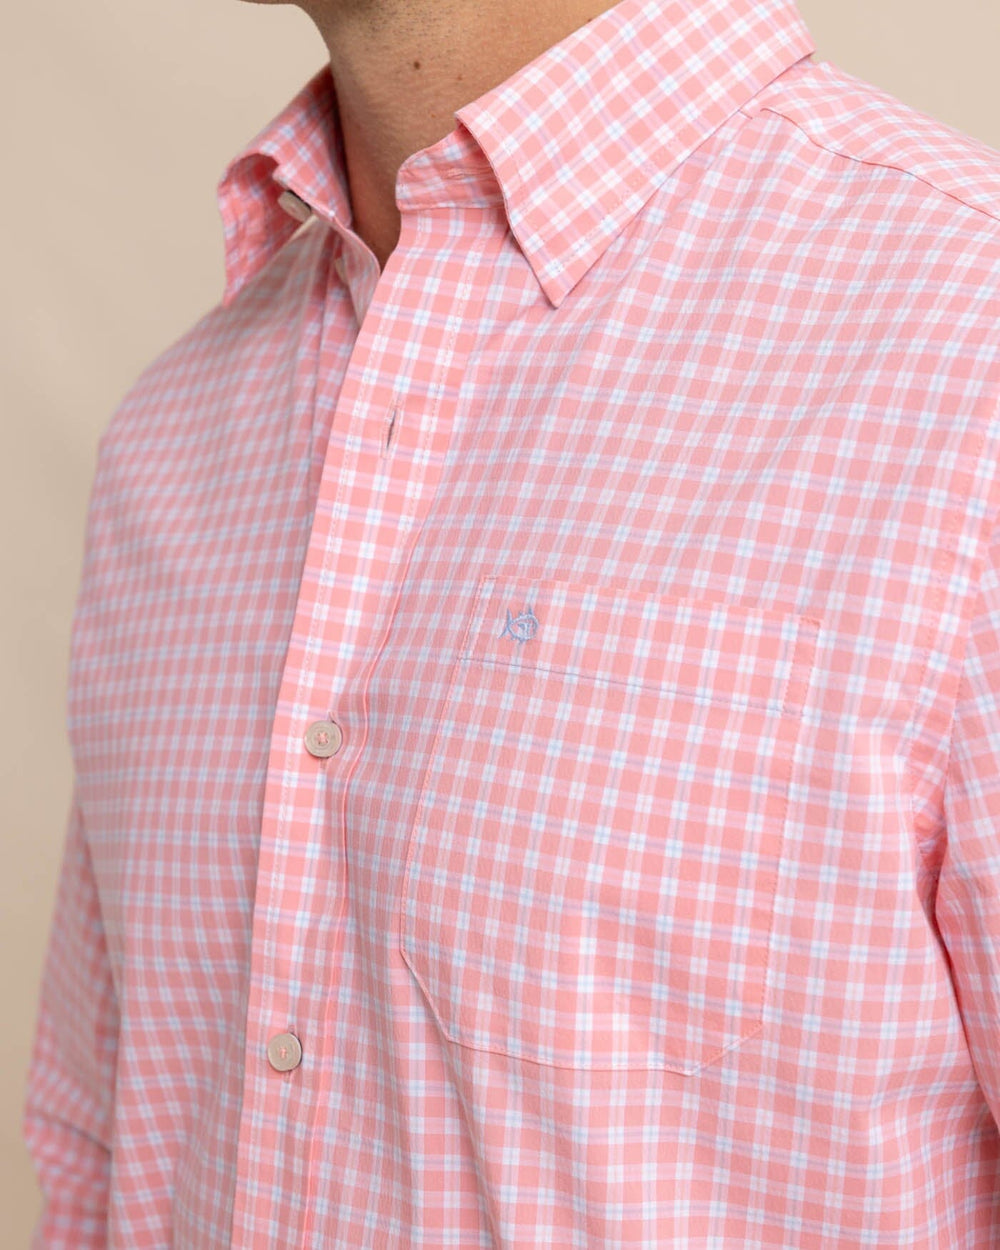 The detail view of the Southern Tide Charleston Roanoke Check Long Sleeve Sport Shirt by Southern Tide - Flamingo Pink